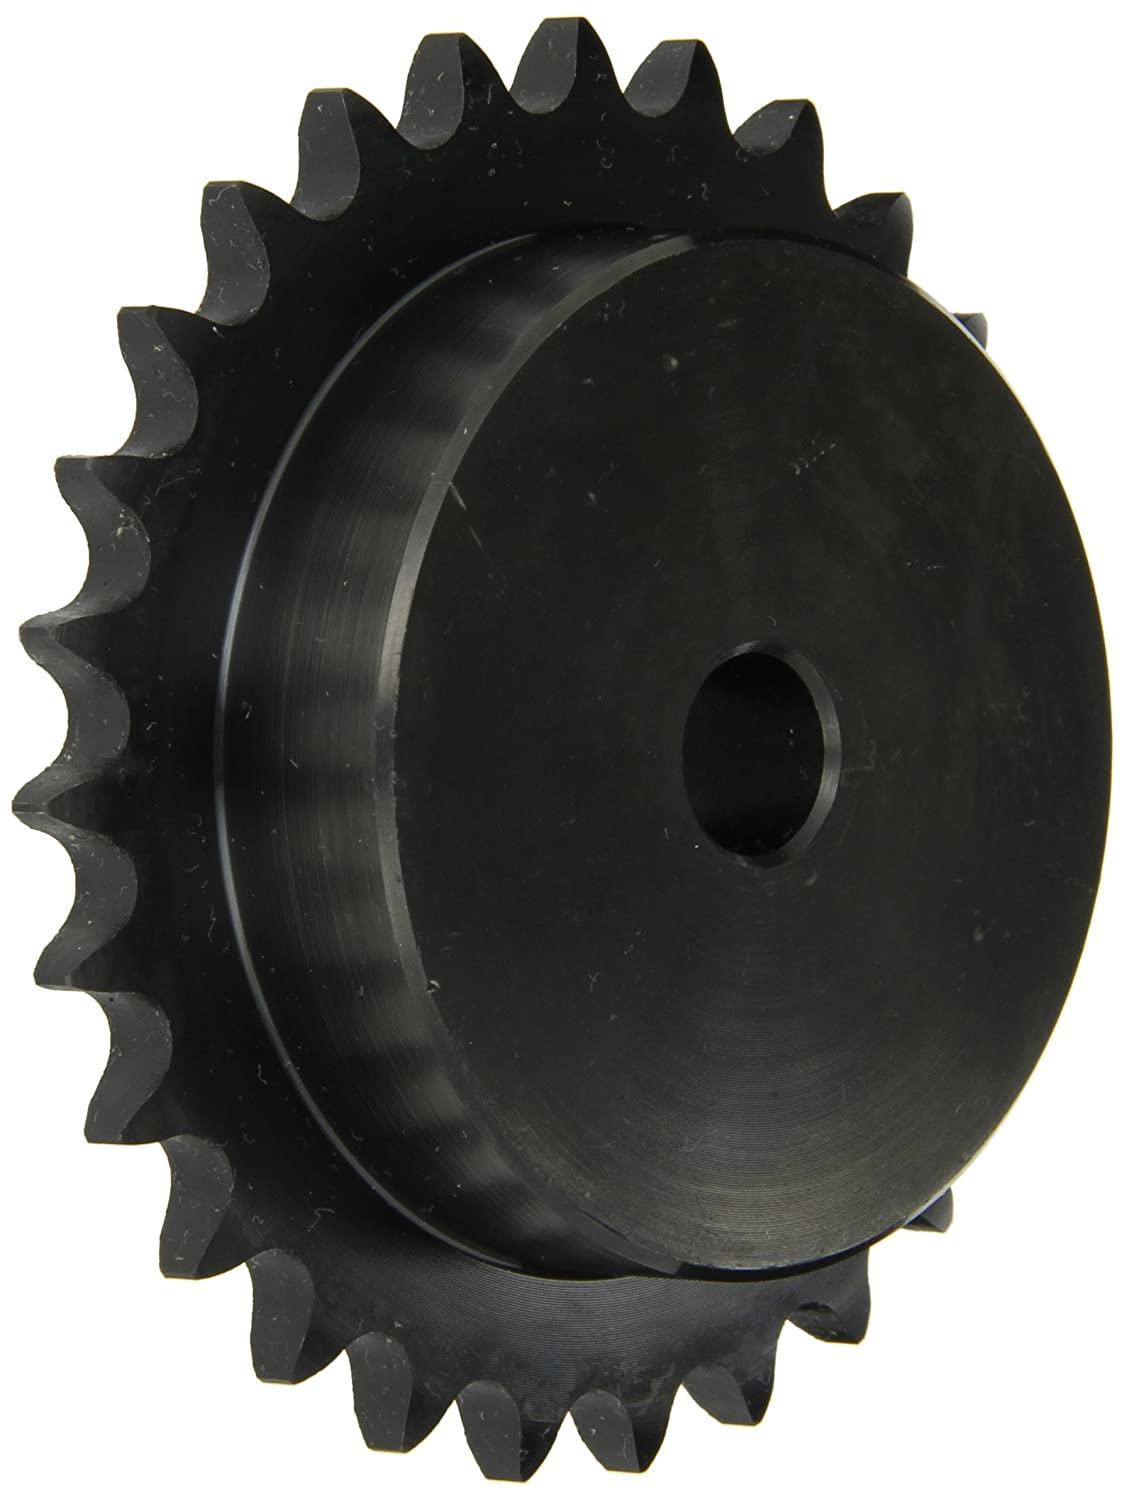 25B26 Roller Chain Sprocket With Stock Bore - Forces Inc